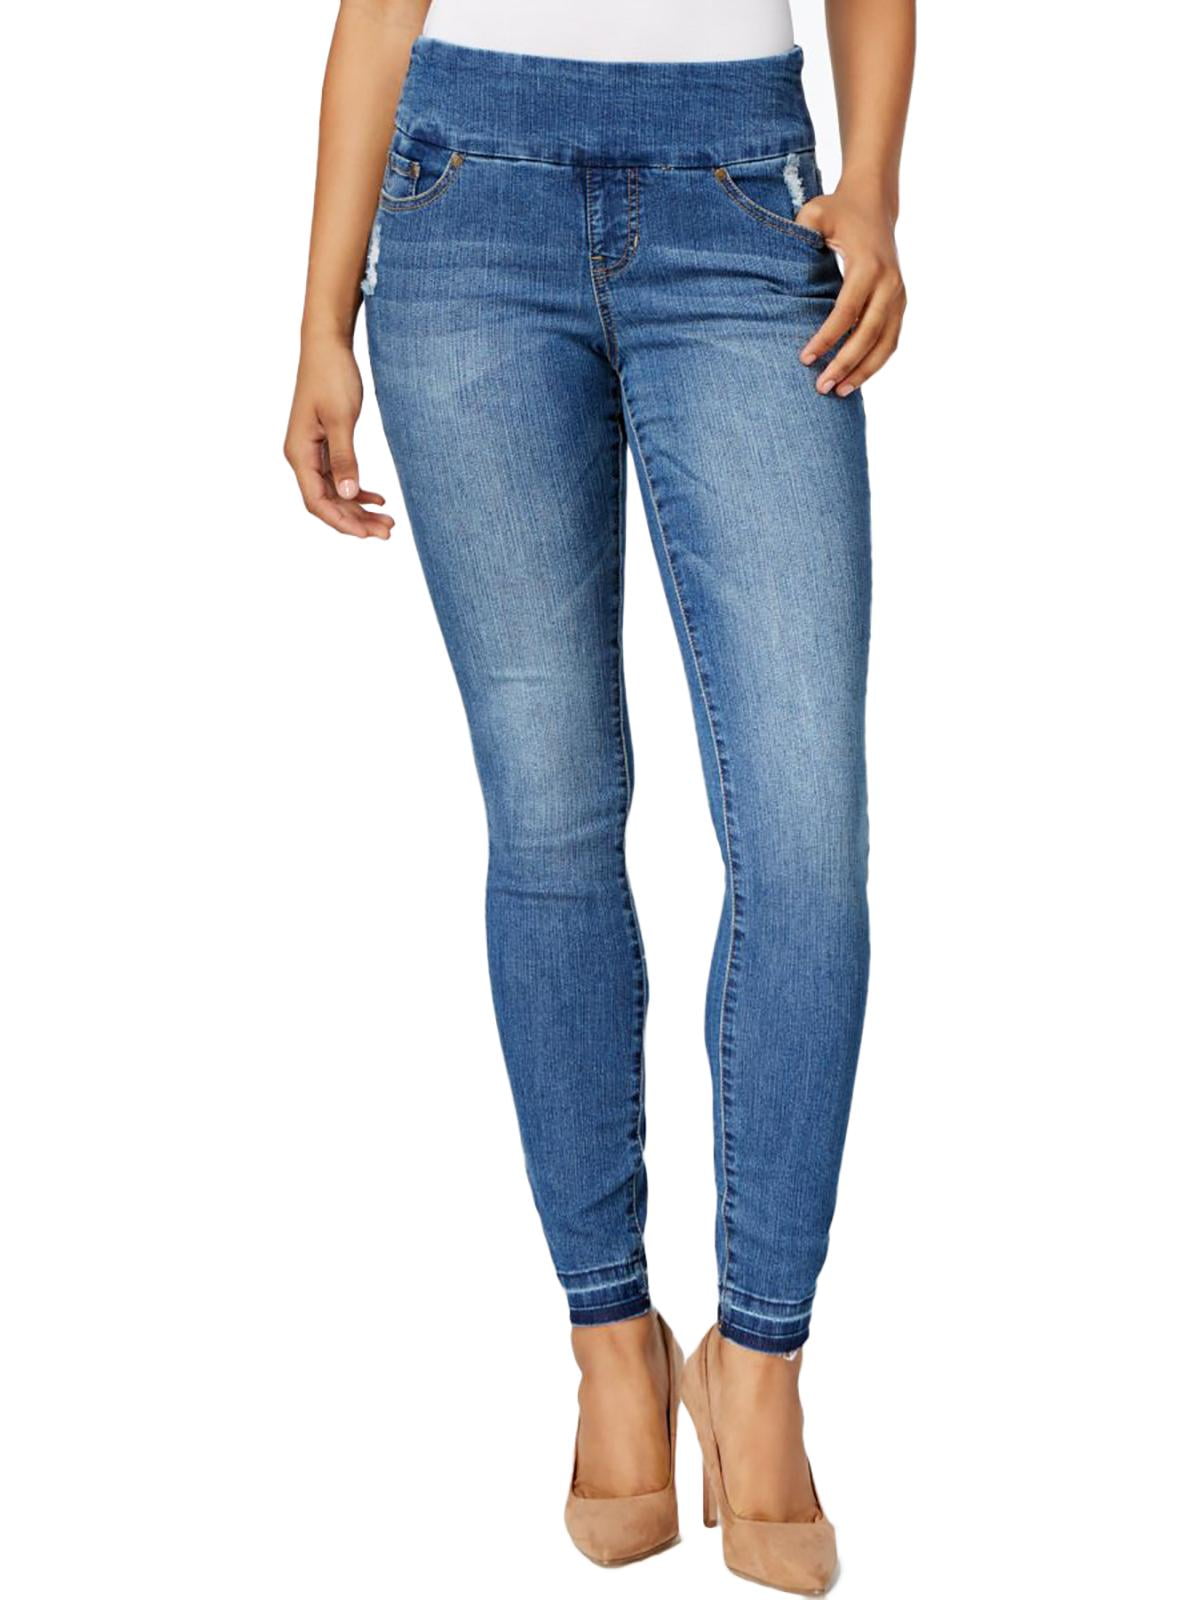 JAG Jeans - Jag Jeans Womens Nora Denim High Rise Skinny Jeans ...